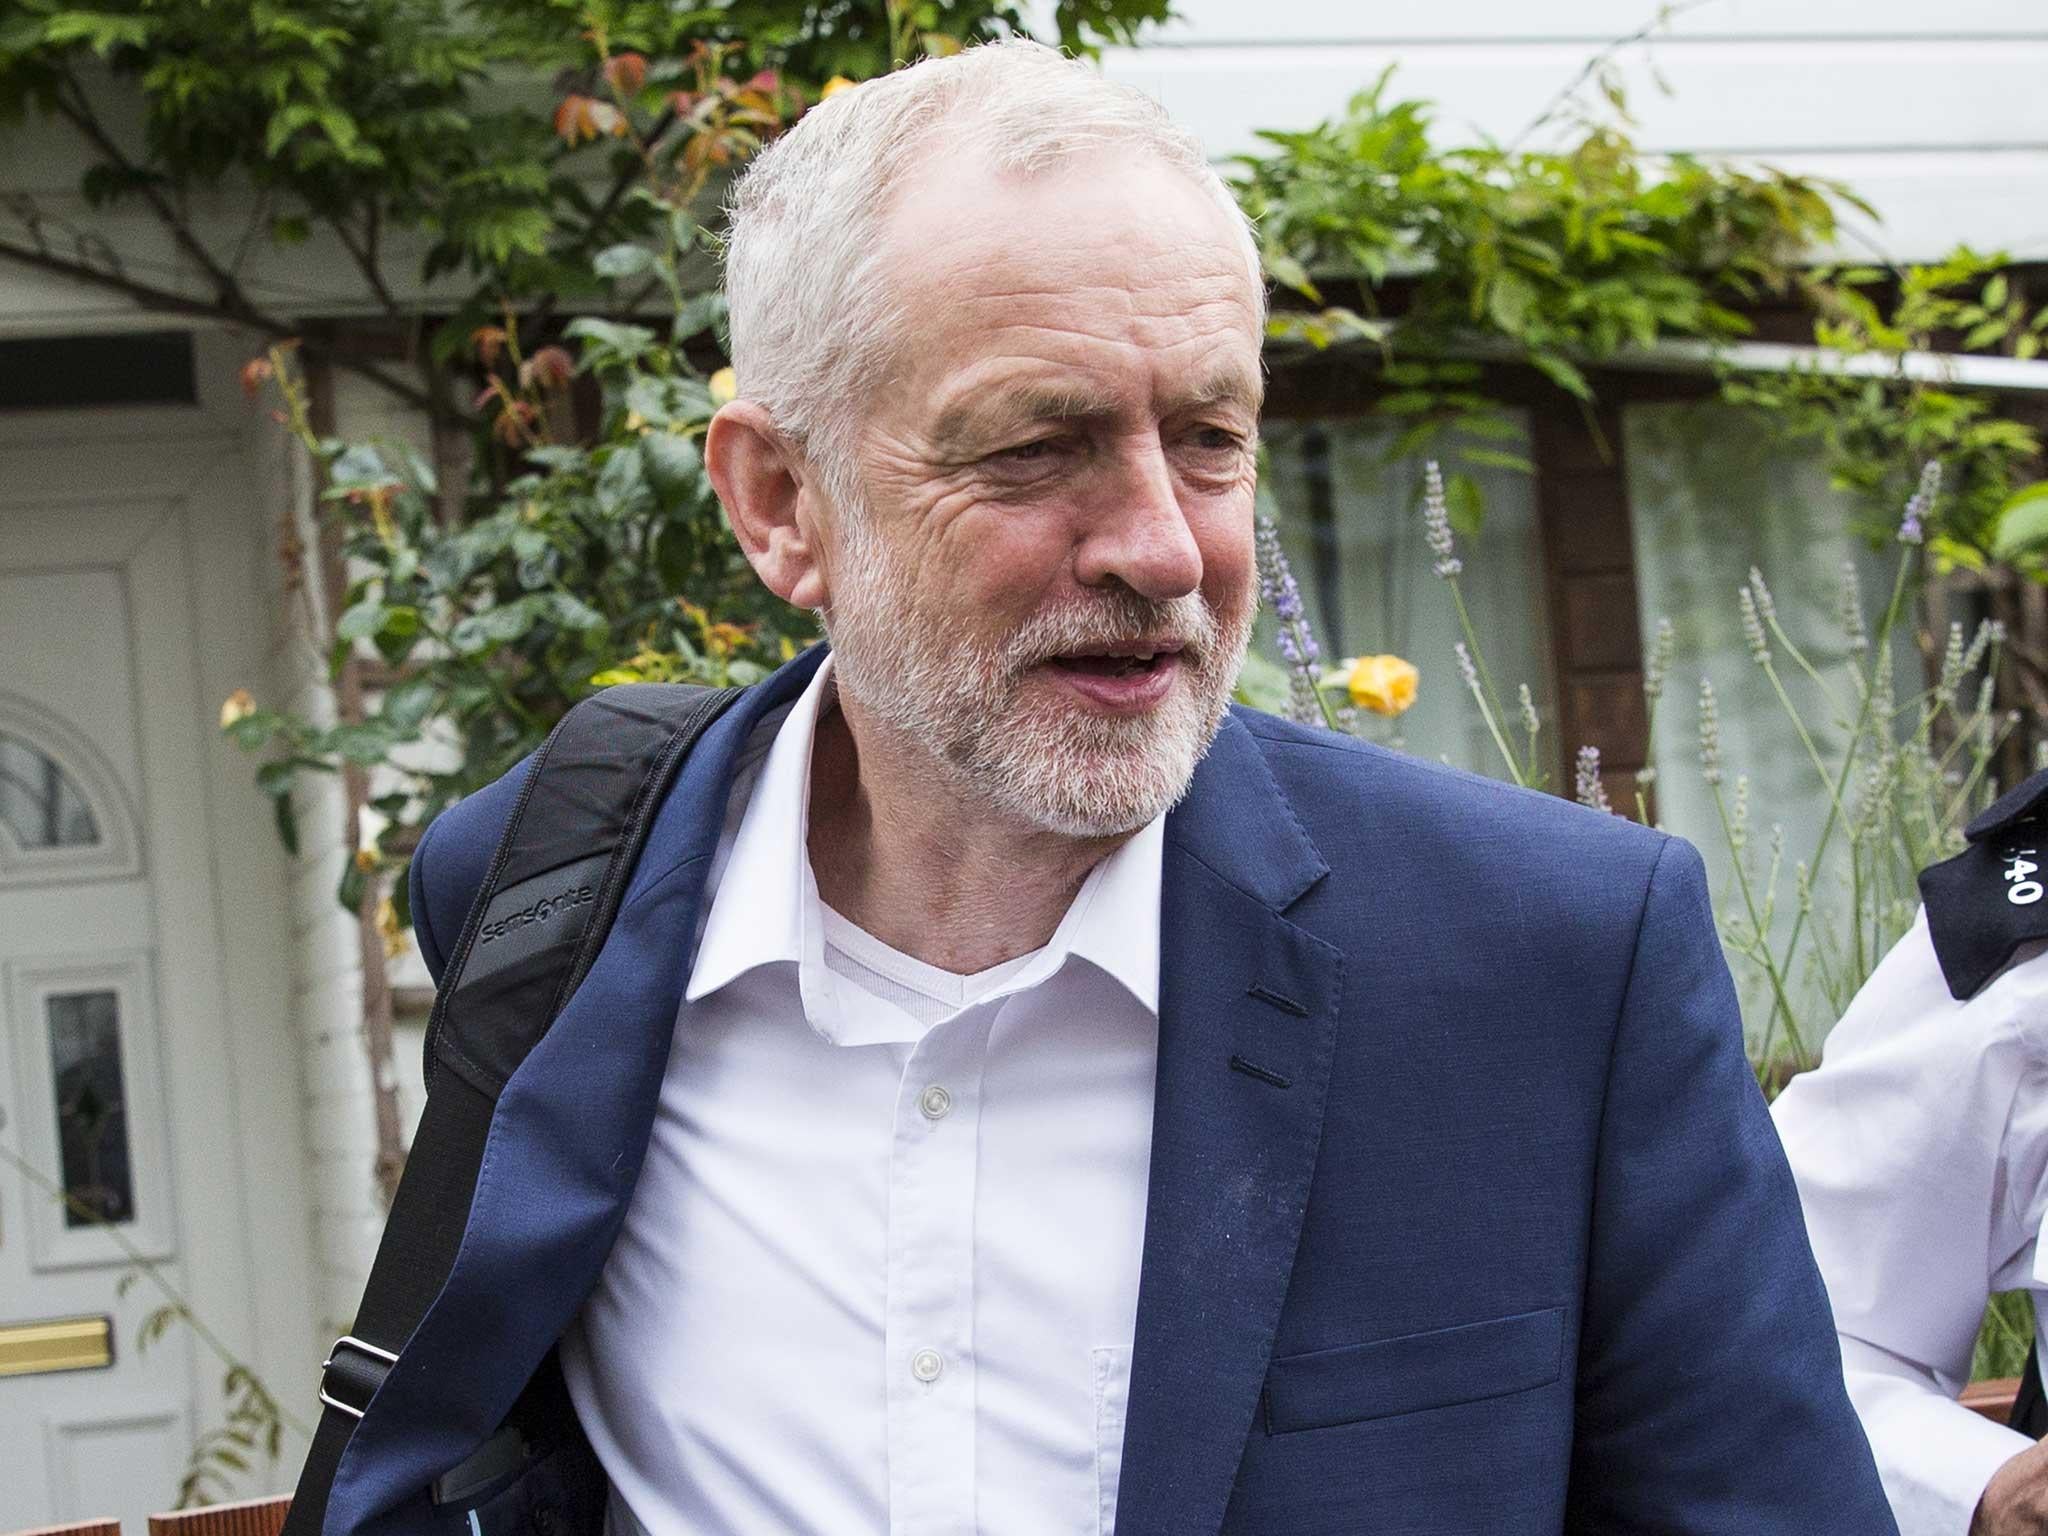 Labour leader Jeremy Corbyn leaving his home in Islington 